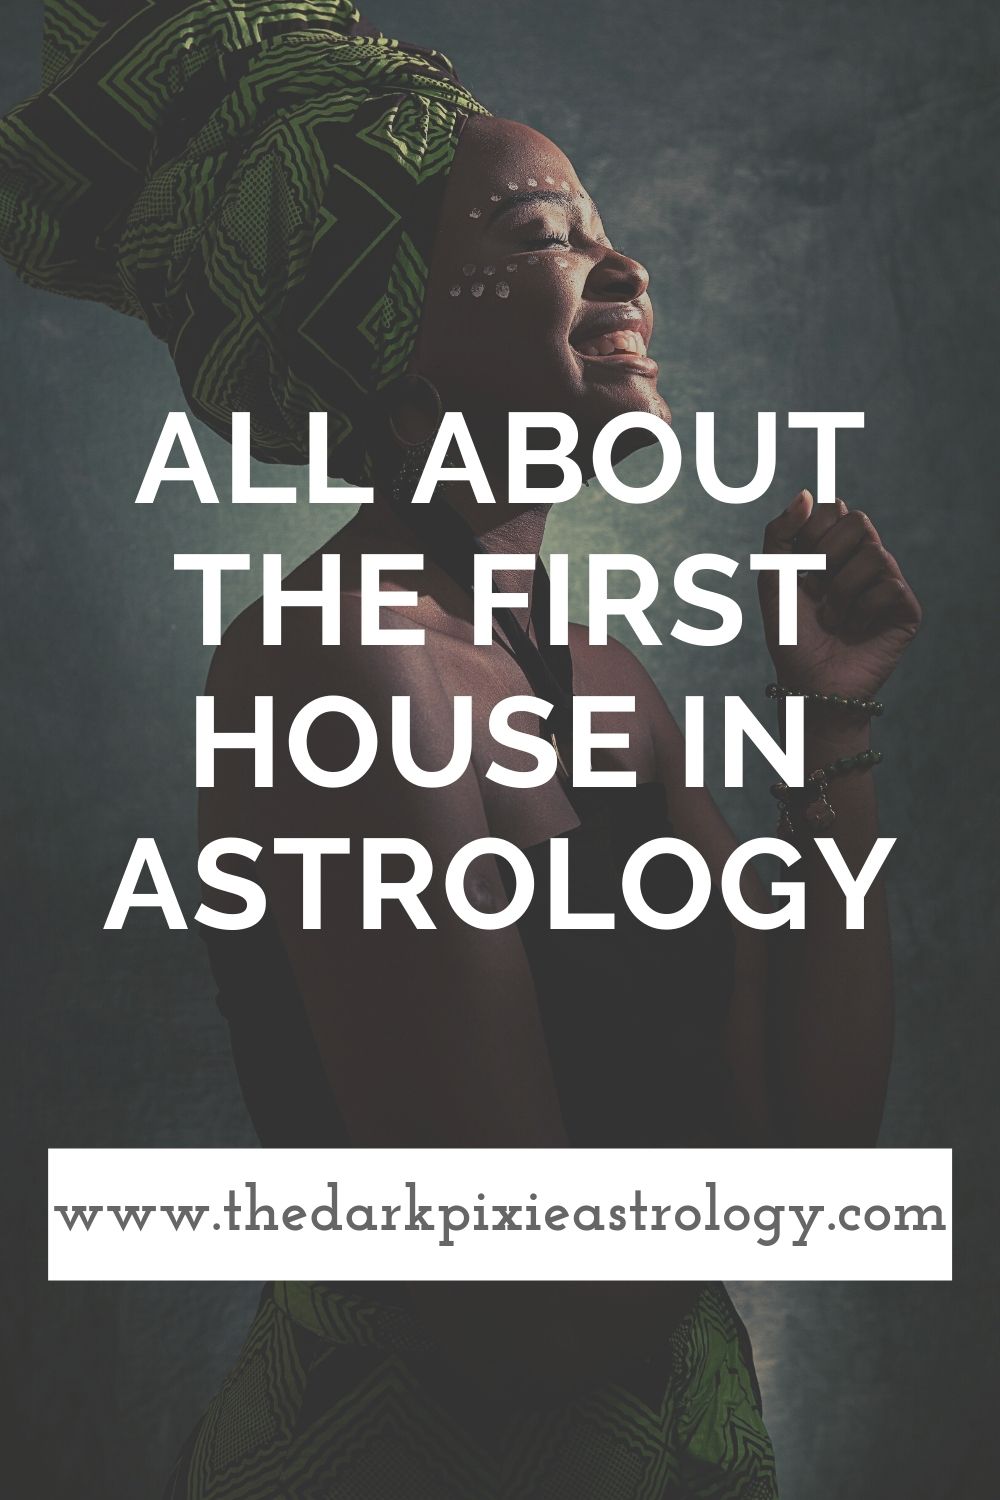 All About the First House in Astrology - The Dark Pixie Astrology